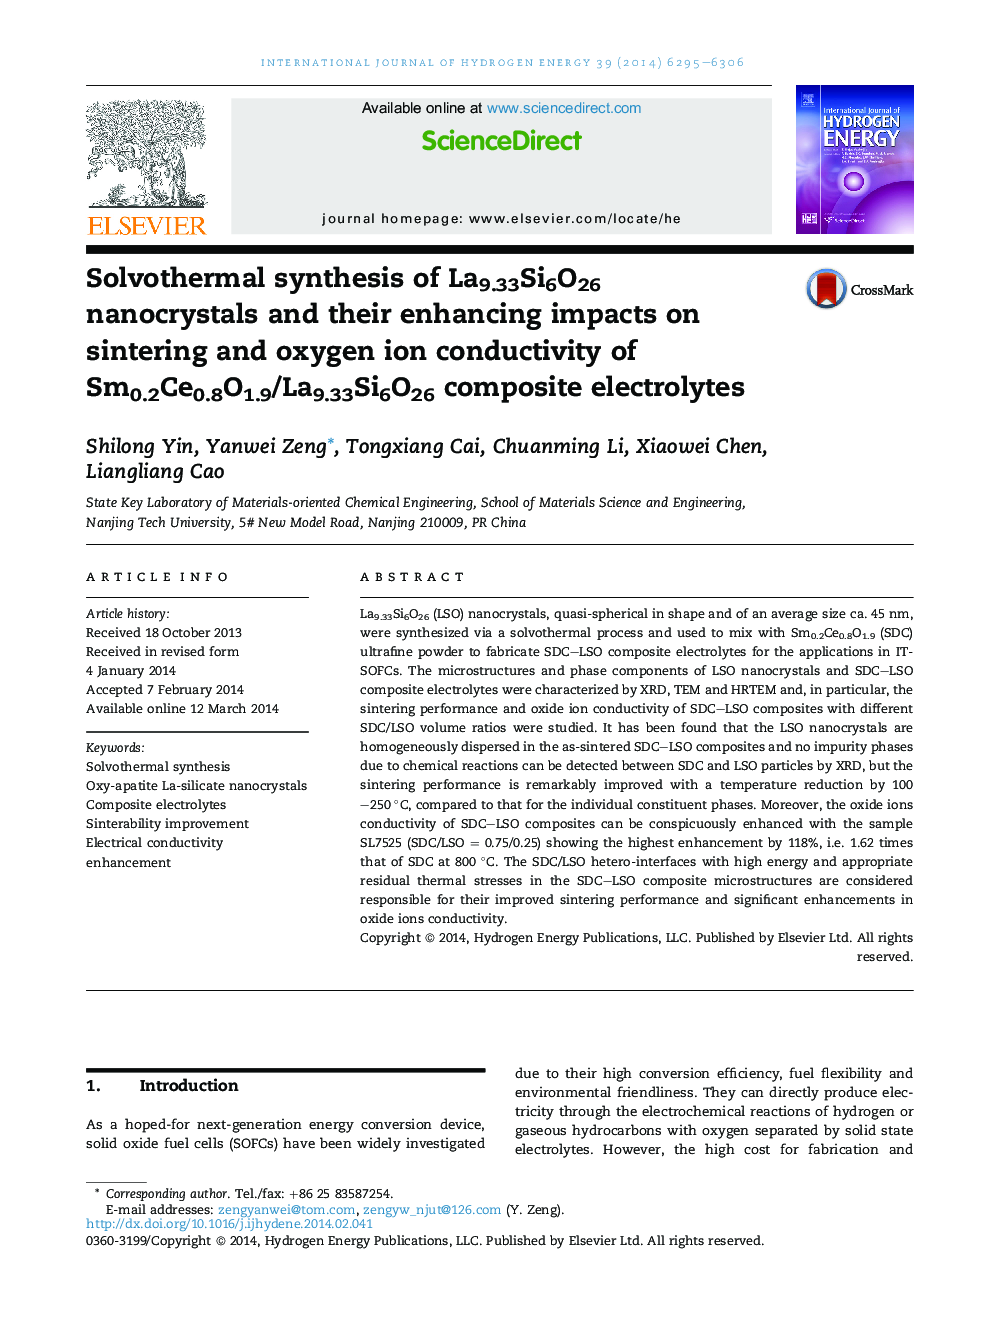 Solvothermal synthesis of La9.33Si6O26 nanocrystals and their enhancing impacts on sintering and oxygen ion conductivity of Sm0.2Ce0.8O1.9/La9.33Si6O26 composite electrolytes